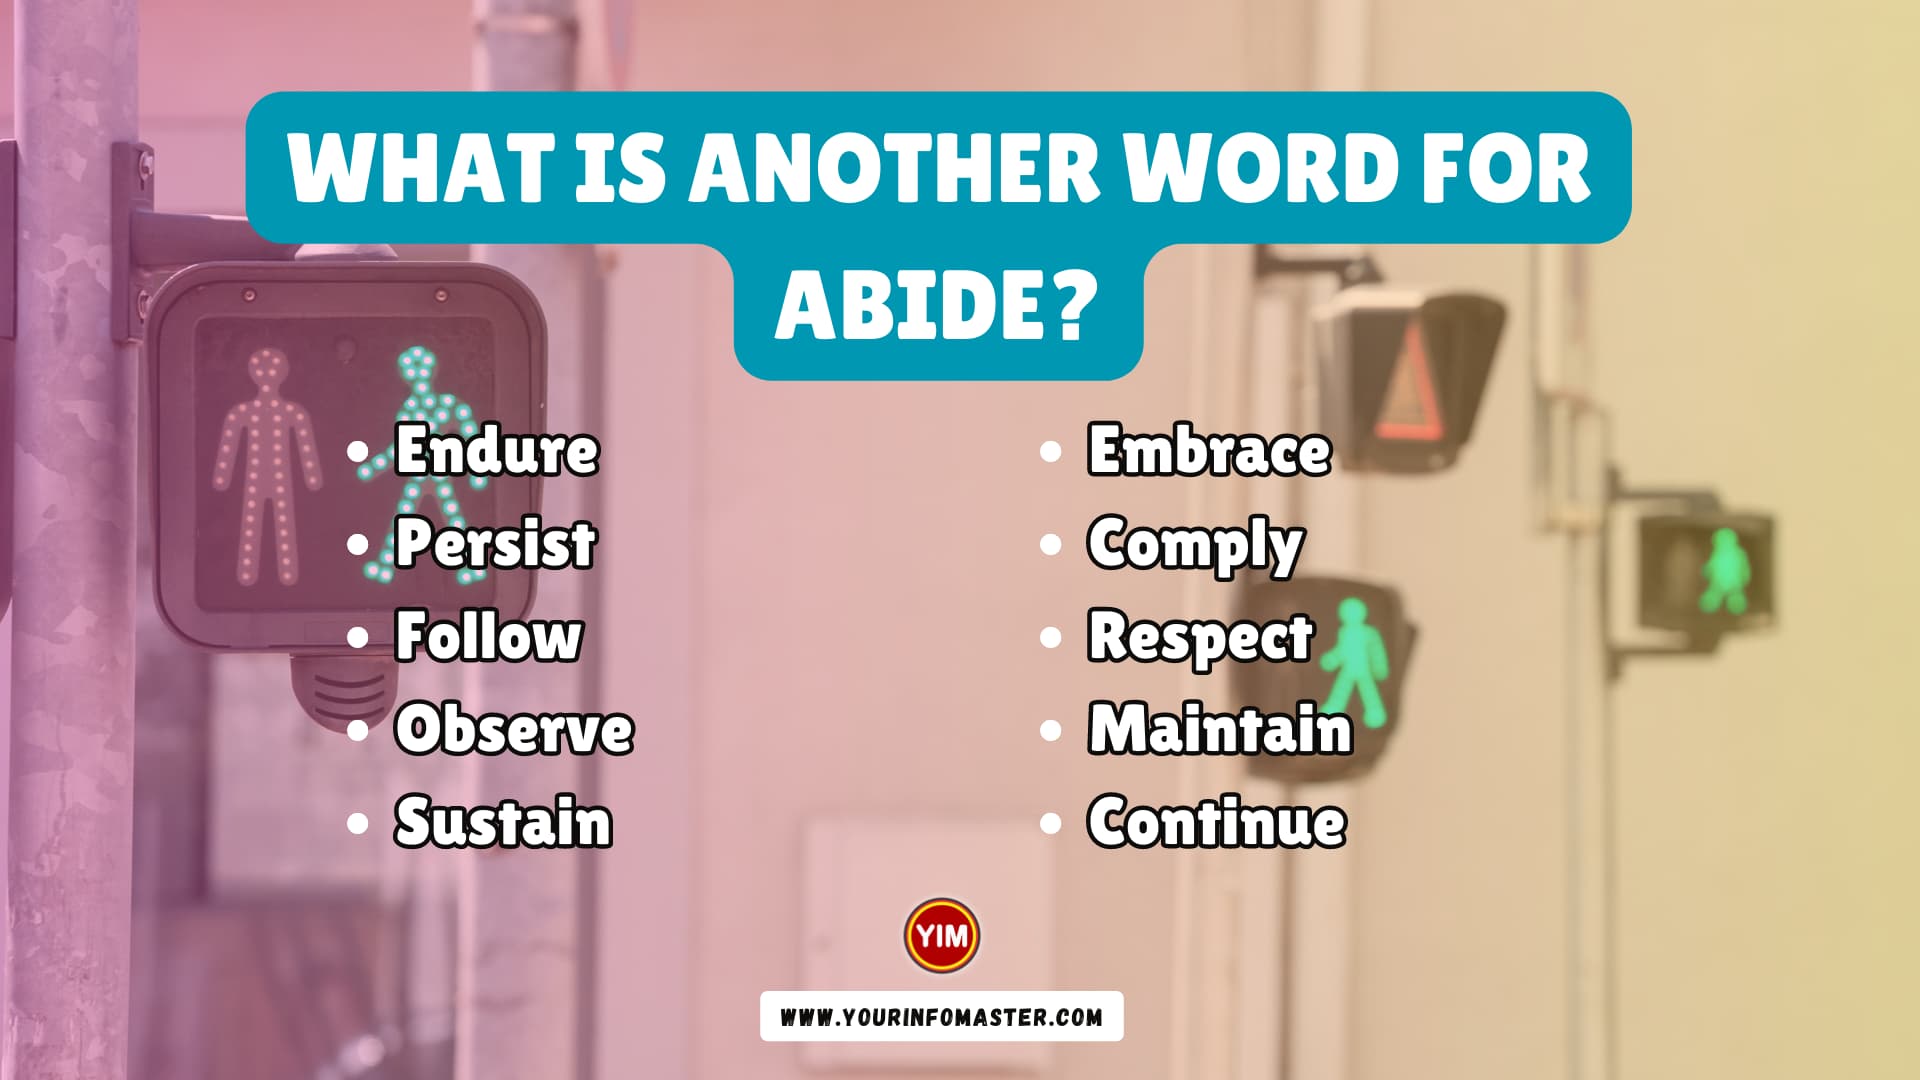 What is another word for Abide